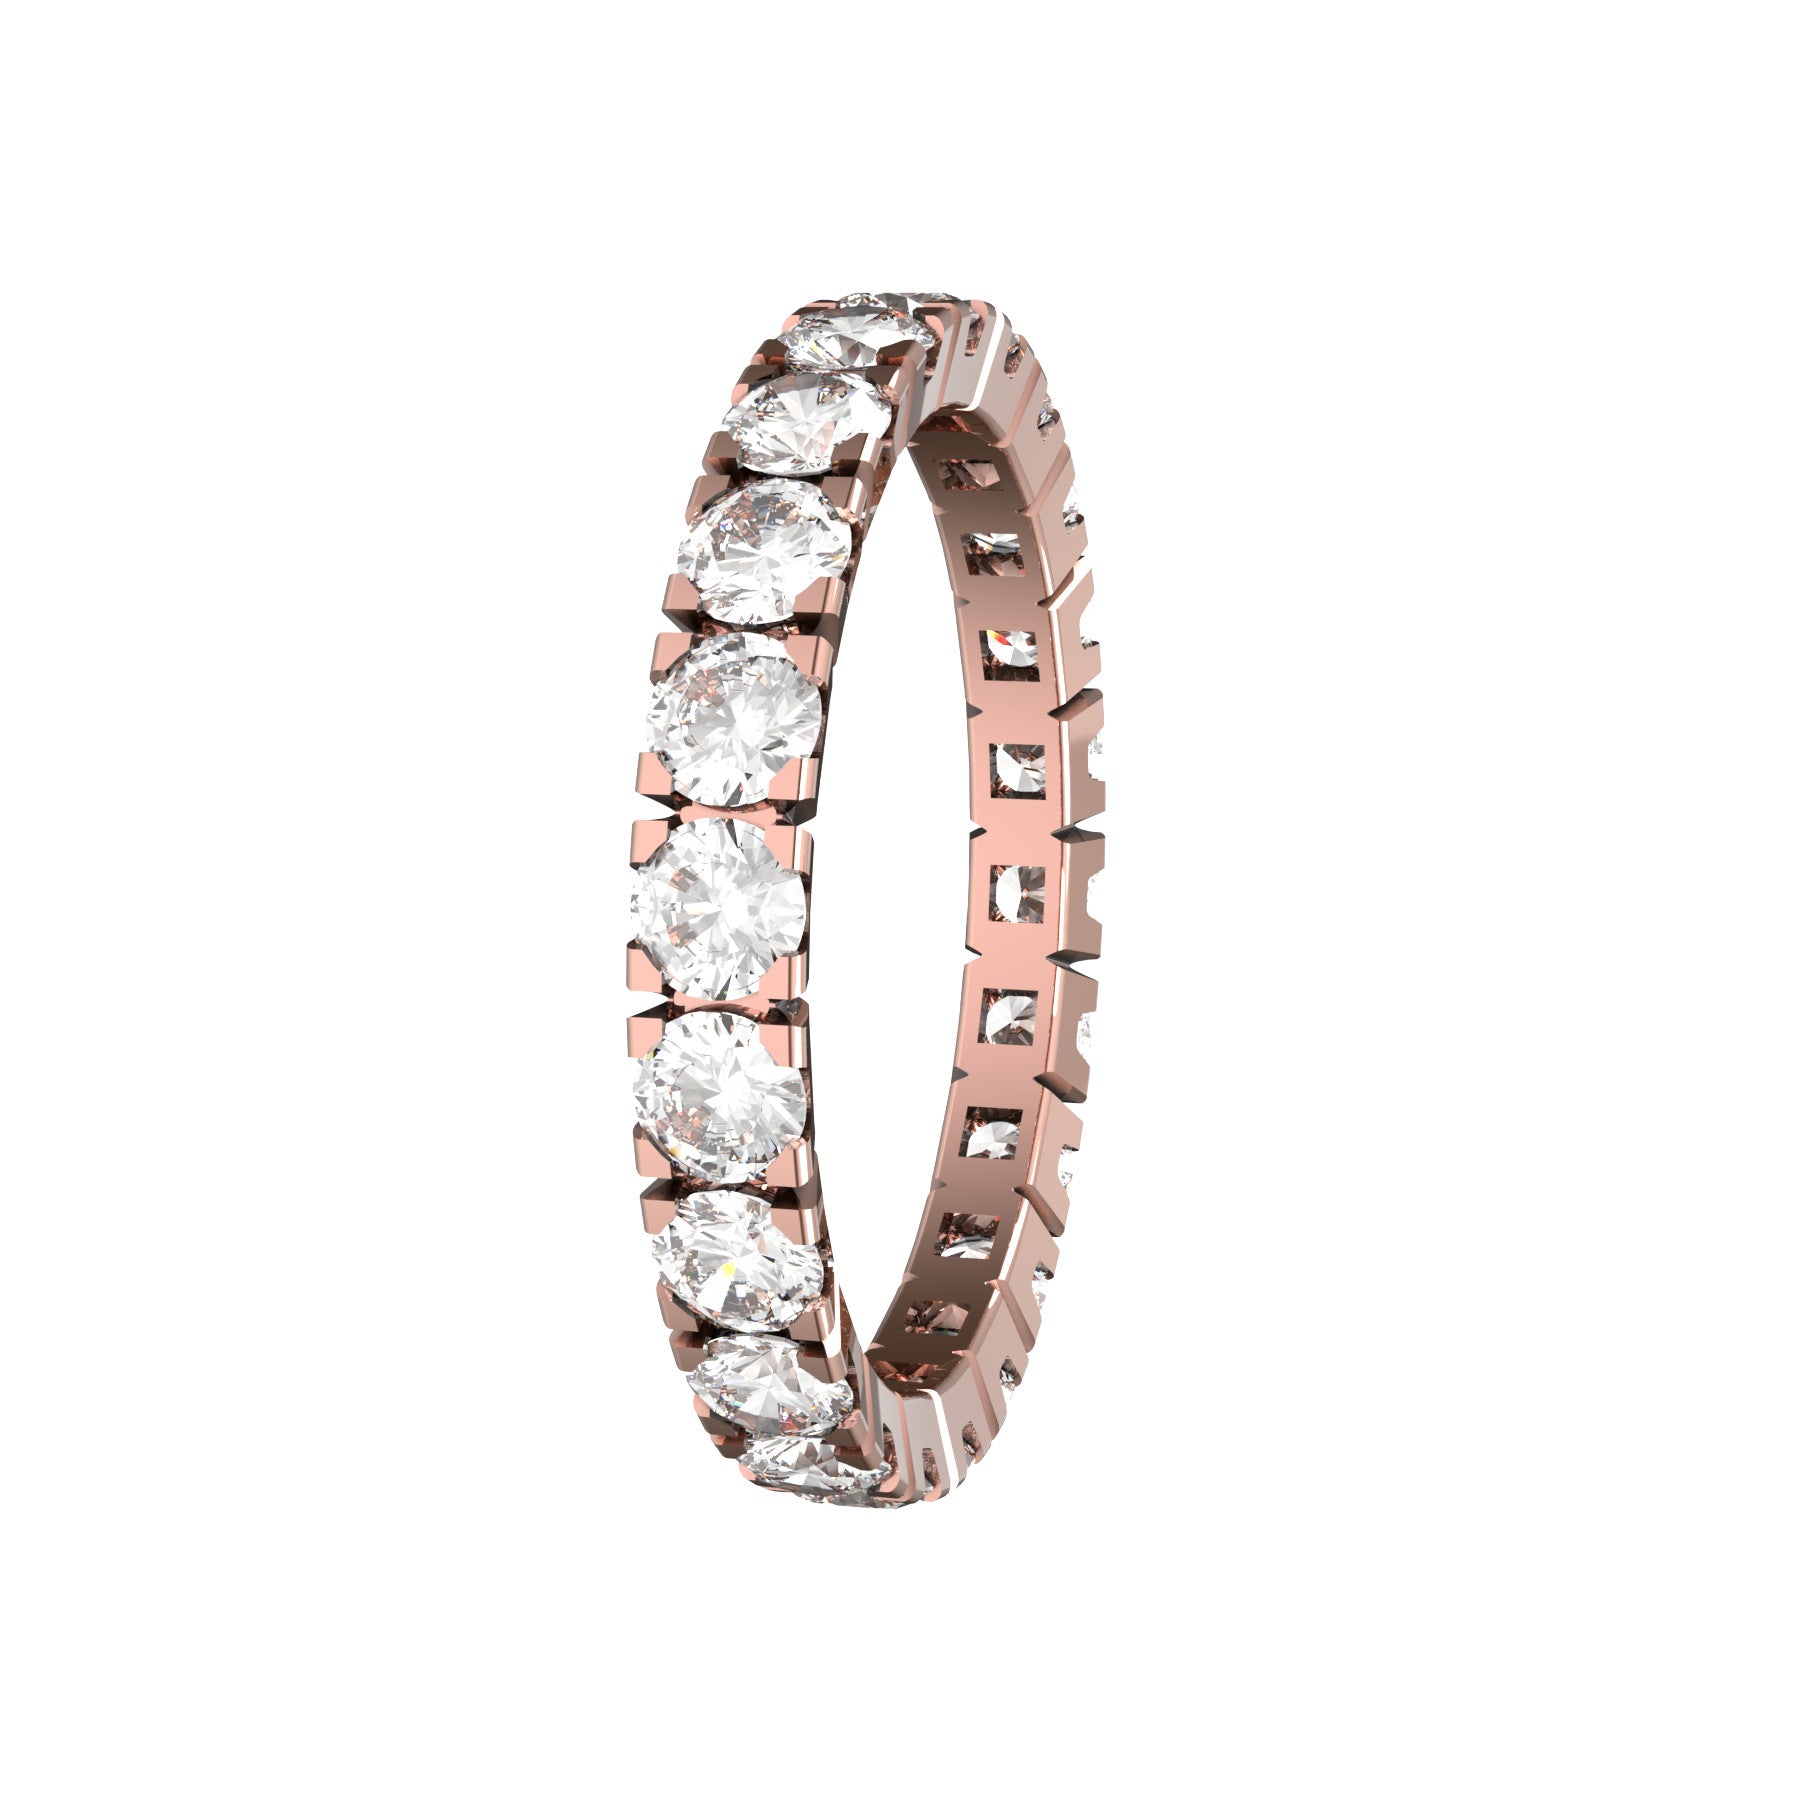 forever wedding ring, 18 K pink gold, 0,07 ct round natural diamond, weight about 2,6 g. (0.07 oz), width 2,70 mm